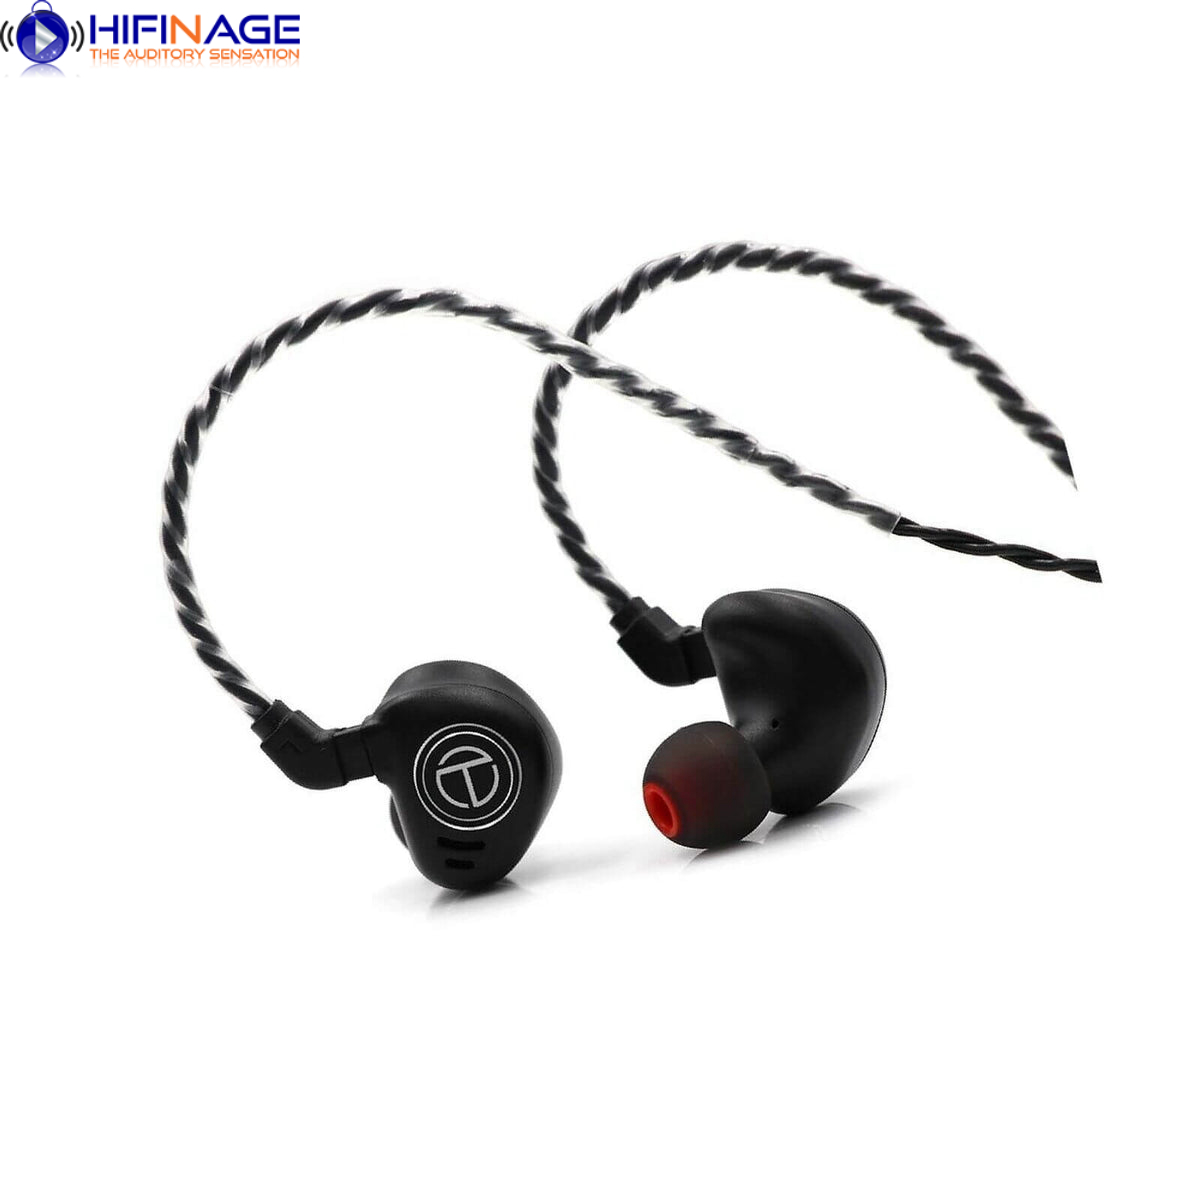 Check out this product 😀😀 by starting at ₹ 4649.00 .
Order now: hifinage.com/products/trn-v… 
#earphones #earphone #earplugearphone #bestearphoneinear #bestearphones #earphonebest #earphonetypec #earphonemic #earphonesbest #earphoneswithmic #earphonesmic #onlinebuyearphone